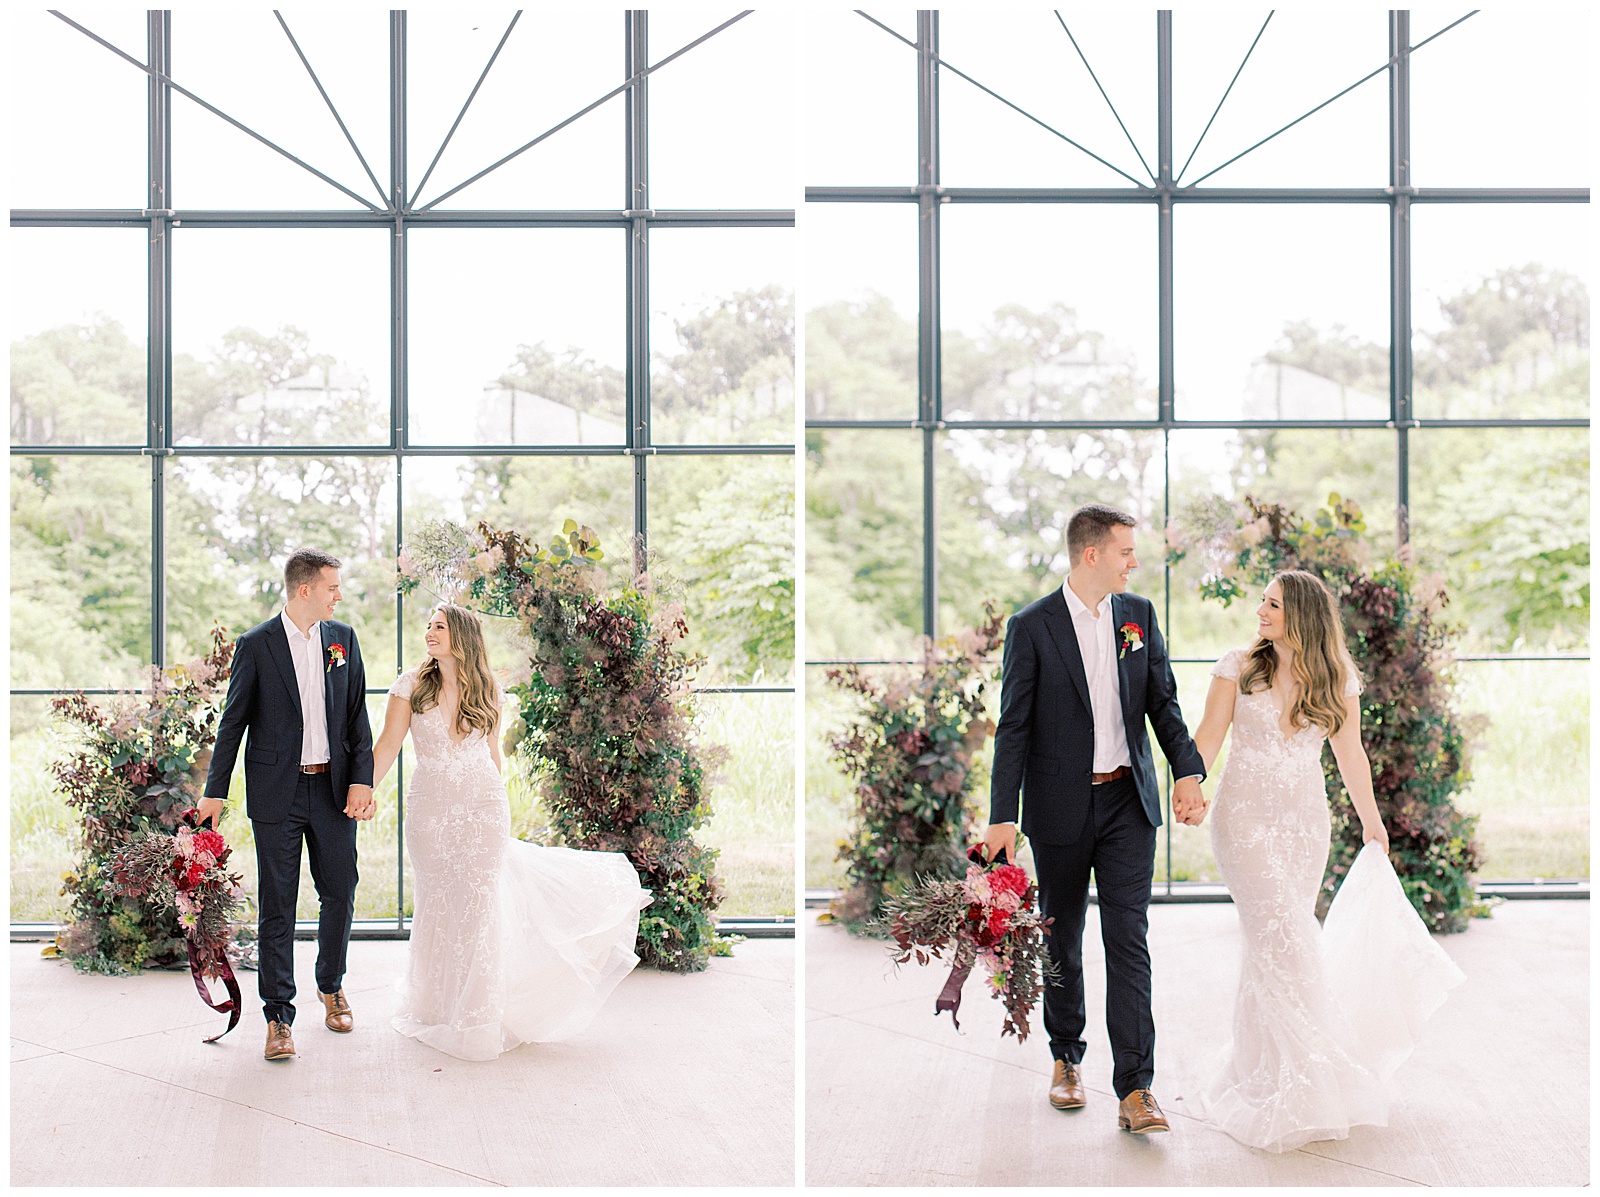 Bride and groom recessional at A-Vent Space floral altar